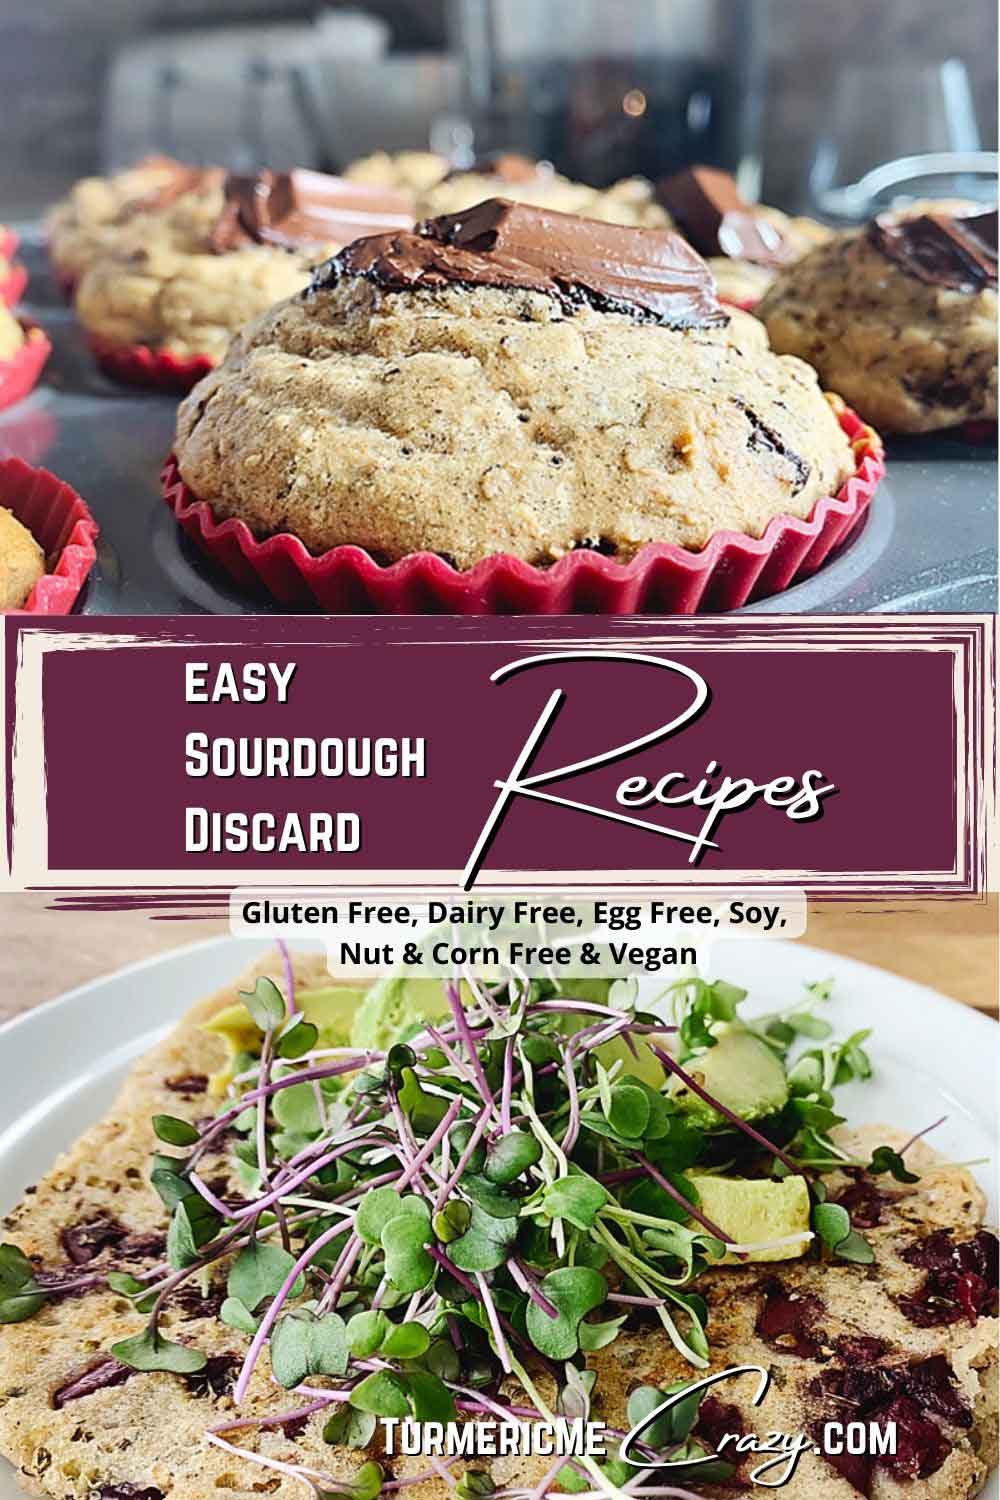 These easy sourdough discard recipes will ensure you have zero waste while making and maintaining your sourdough starter! From quick flatbreads, to fluffy & moist banana muffins, you'll have tons of ideas of what to do with the sourdough discard! gluten free sourdough discard recipes, sourdough discard recipes, easy sourdough discard recipes, zero waste sourdough discard